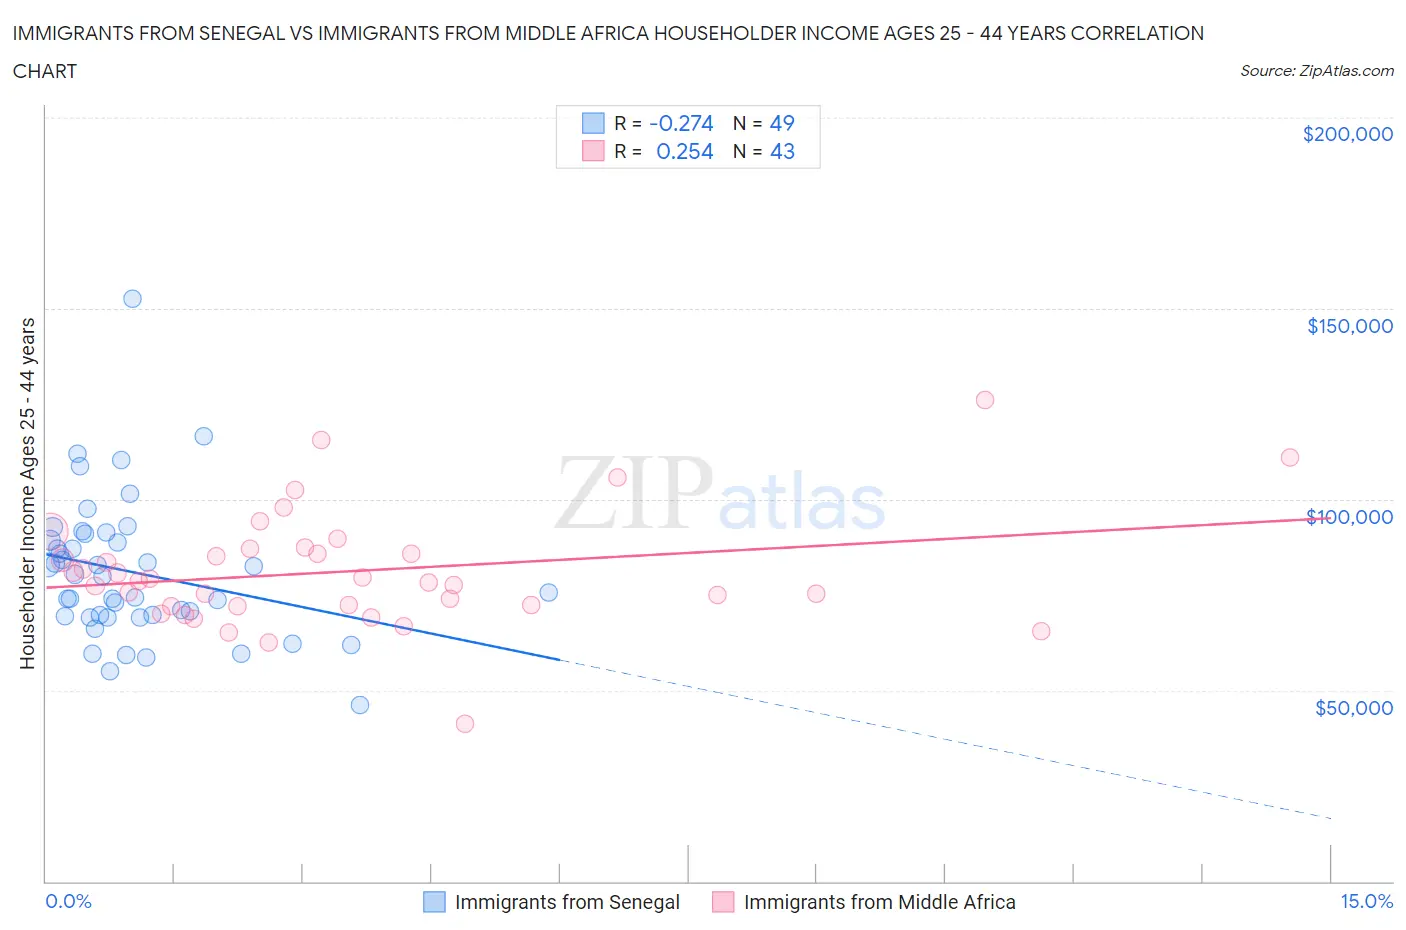 Immigrants from Senegal vs Immigrants from Middle Africa Householder Income Ages 25 - 44 years